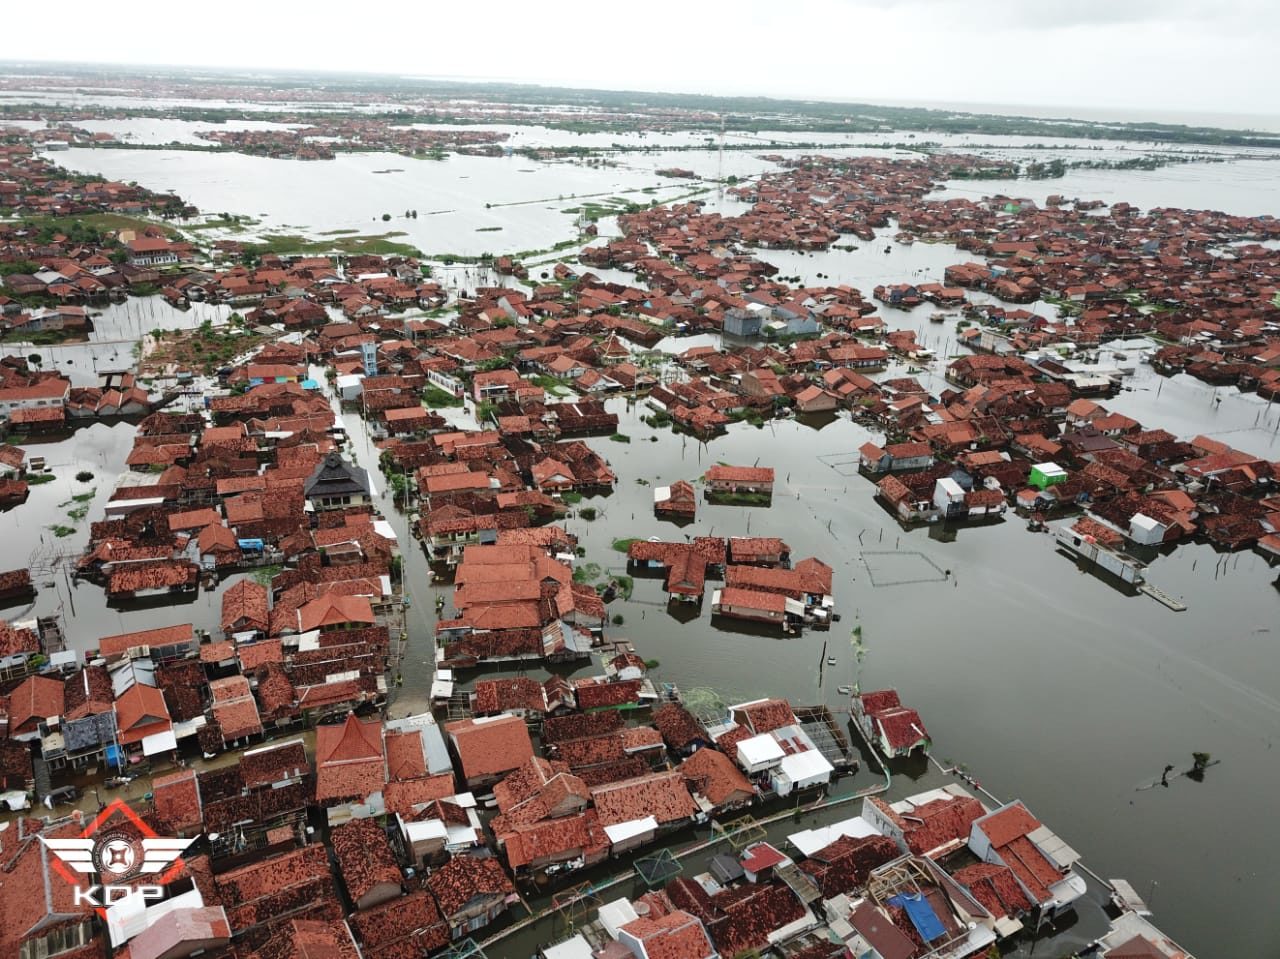 Floods in Pekalongan, Central Java, Indonesia February 2020